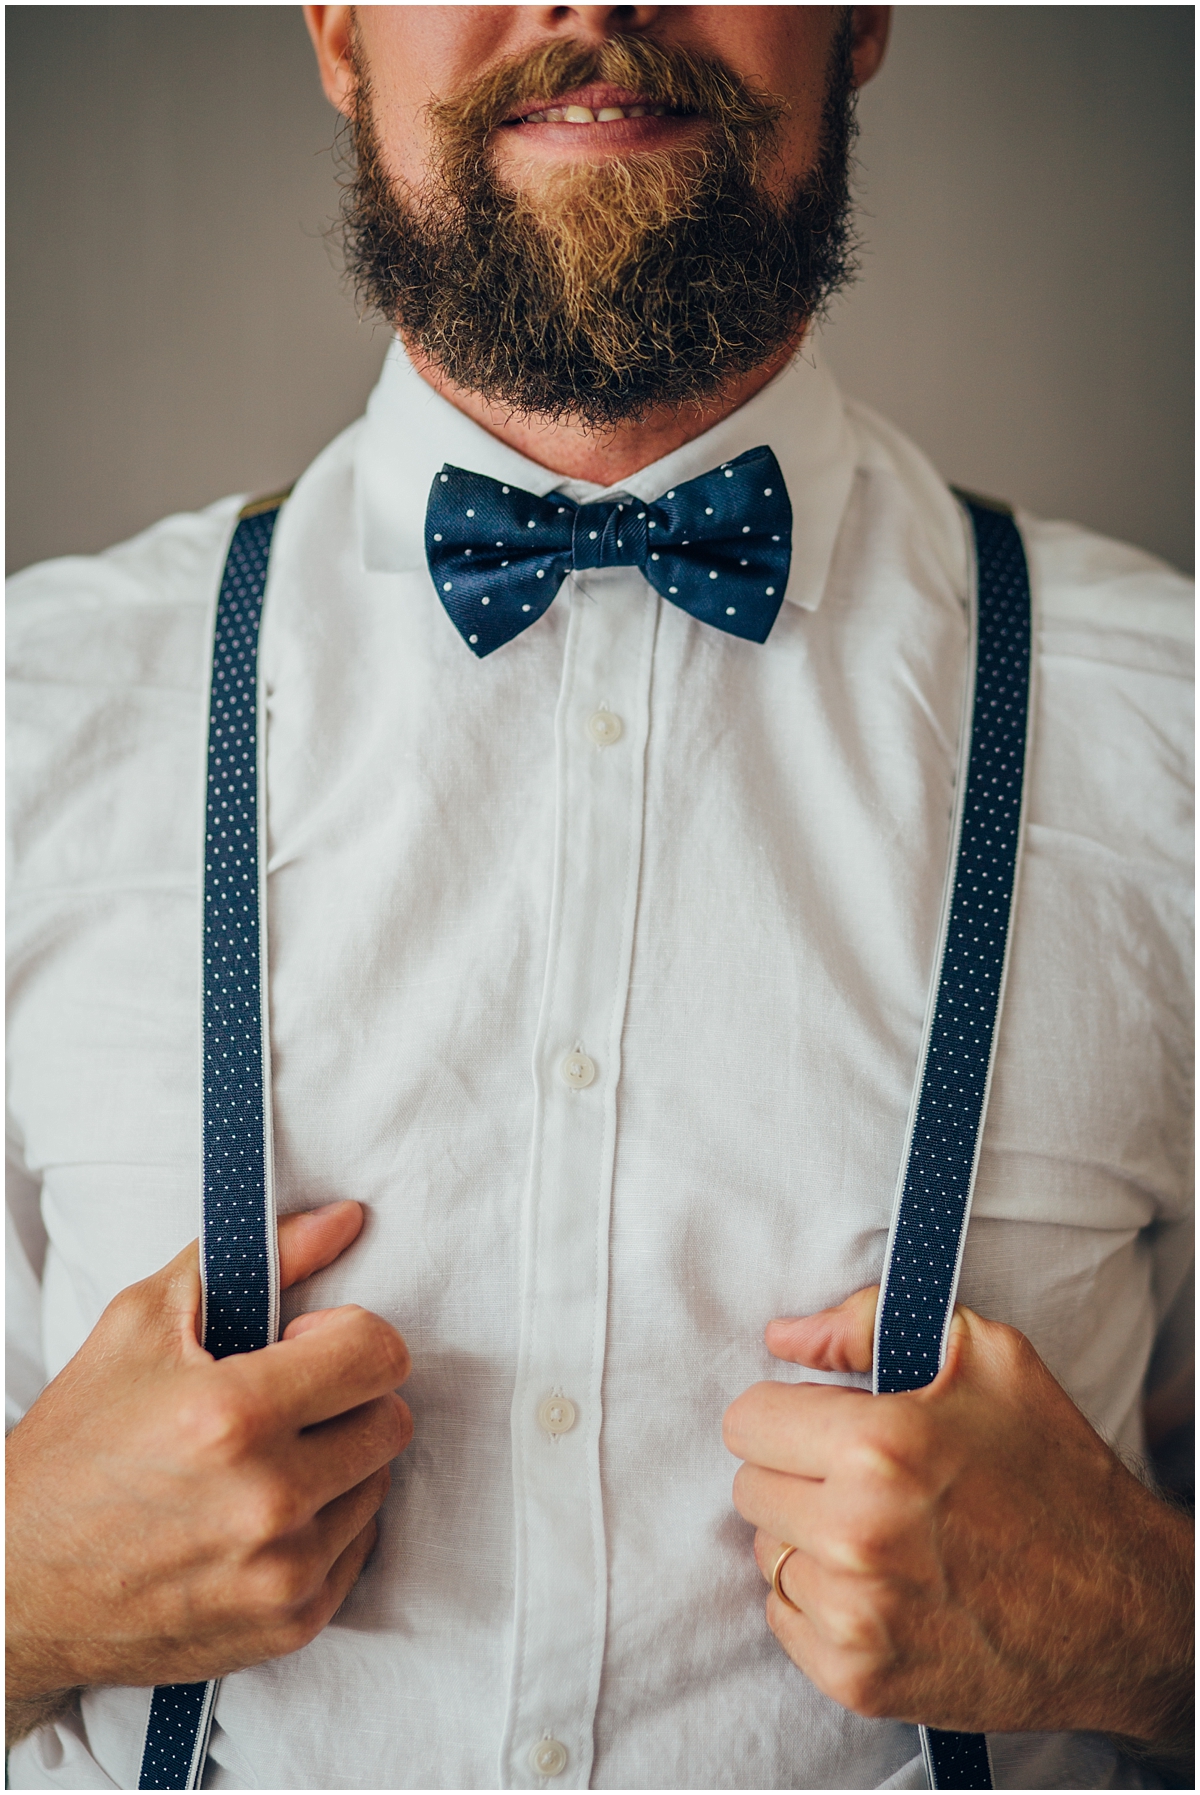 Groom wearing braces and a bow tie